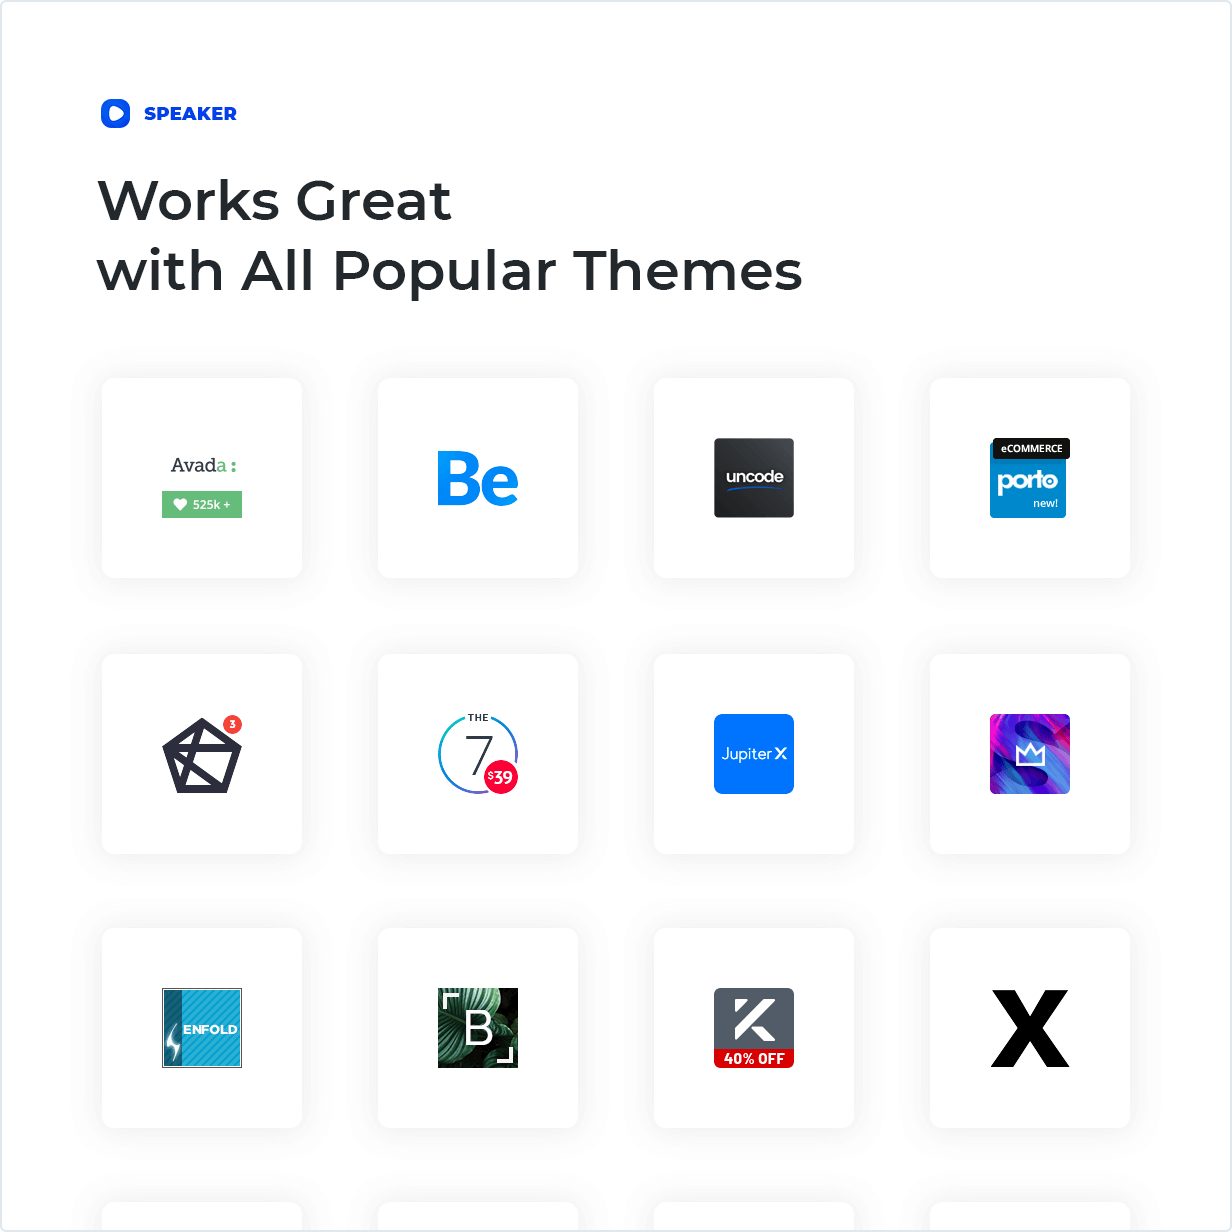 Works Great with All Popular Themes